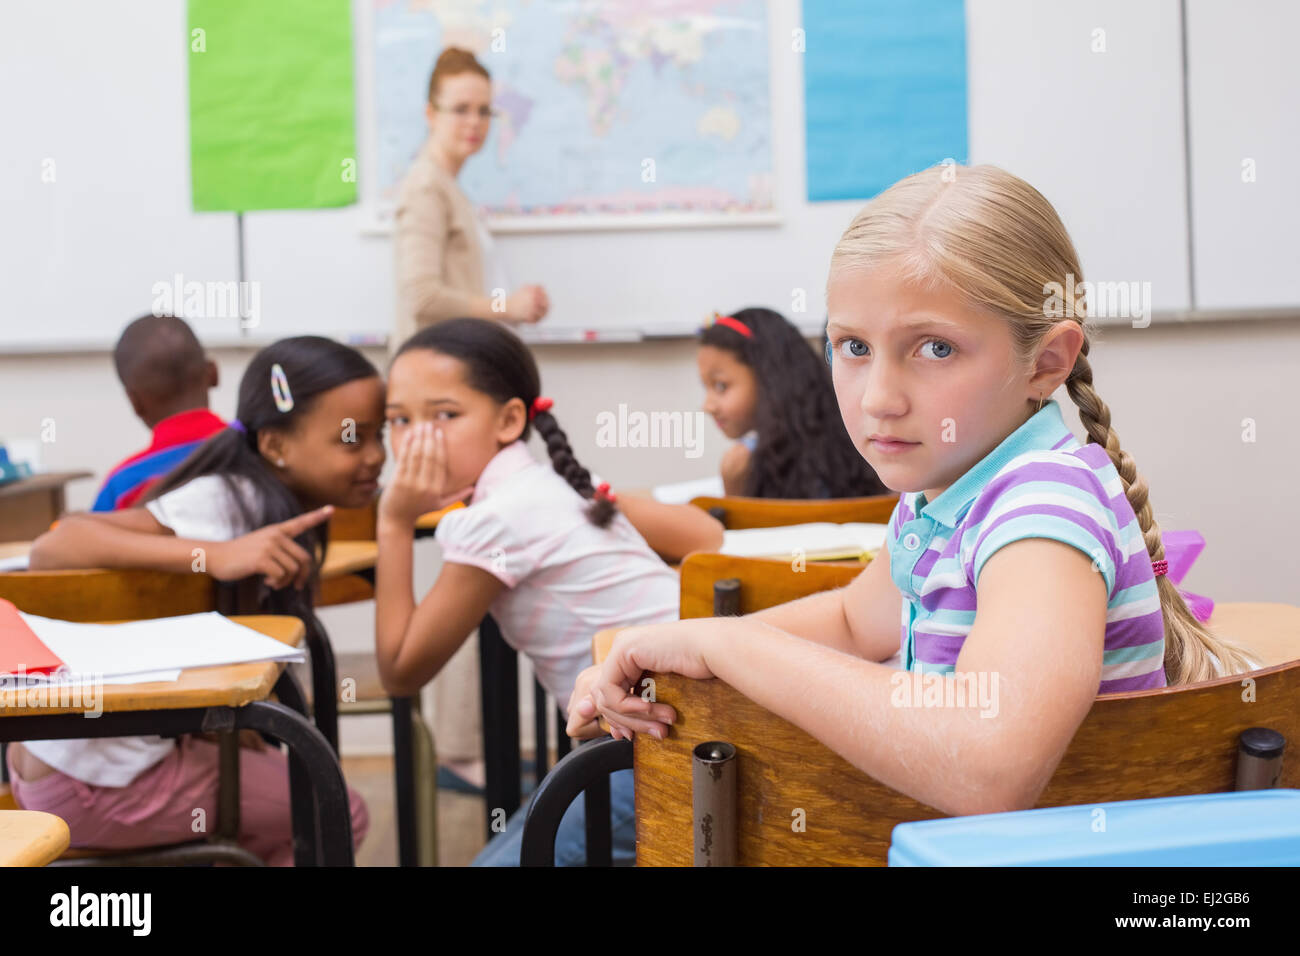 Naughty pupils in class Stock Photo